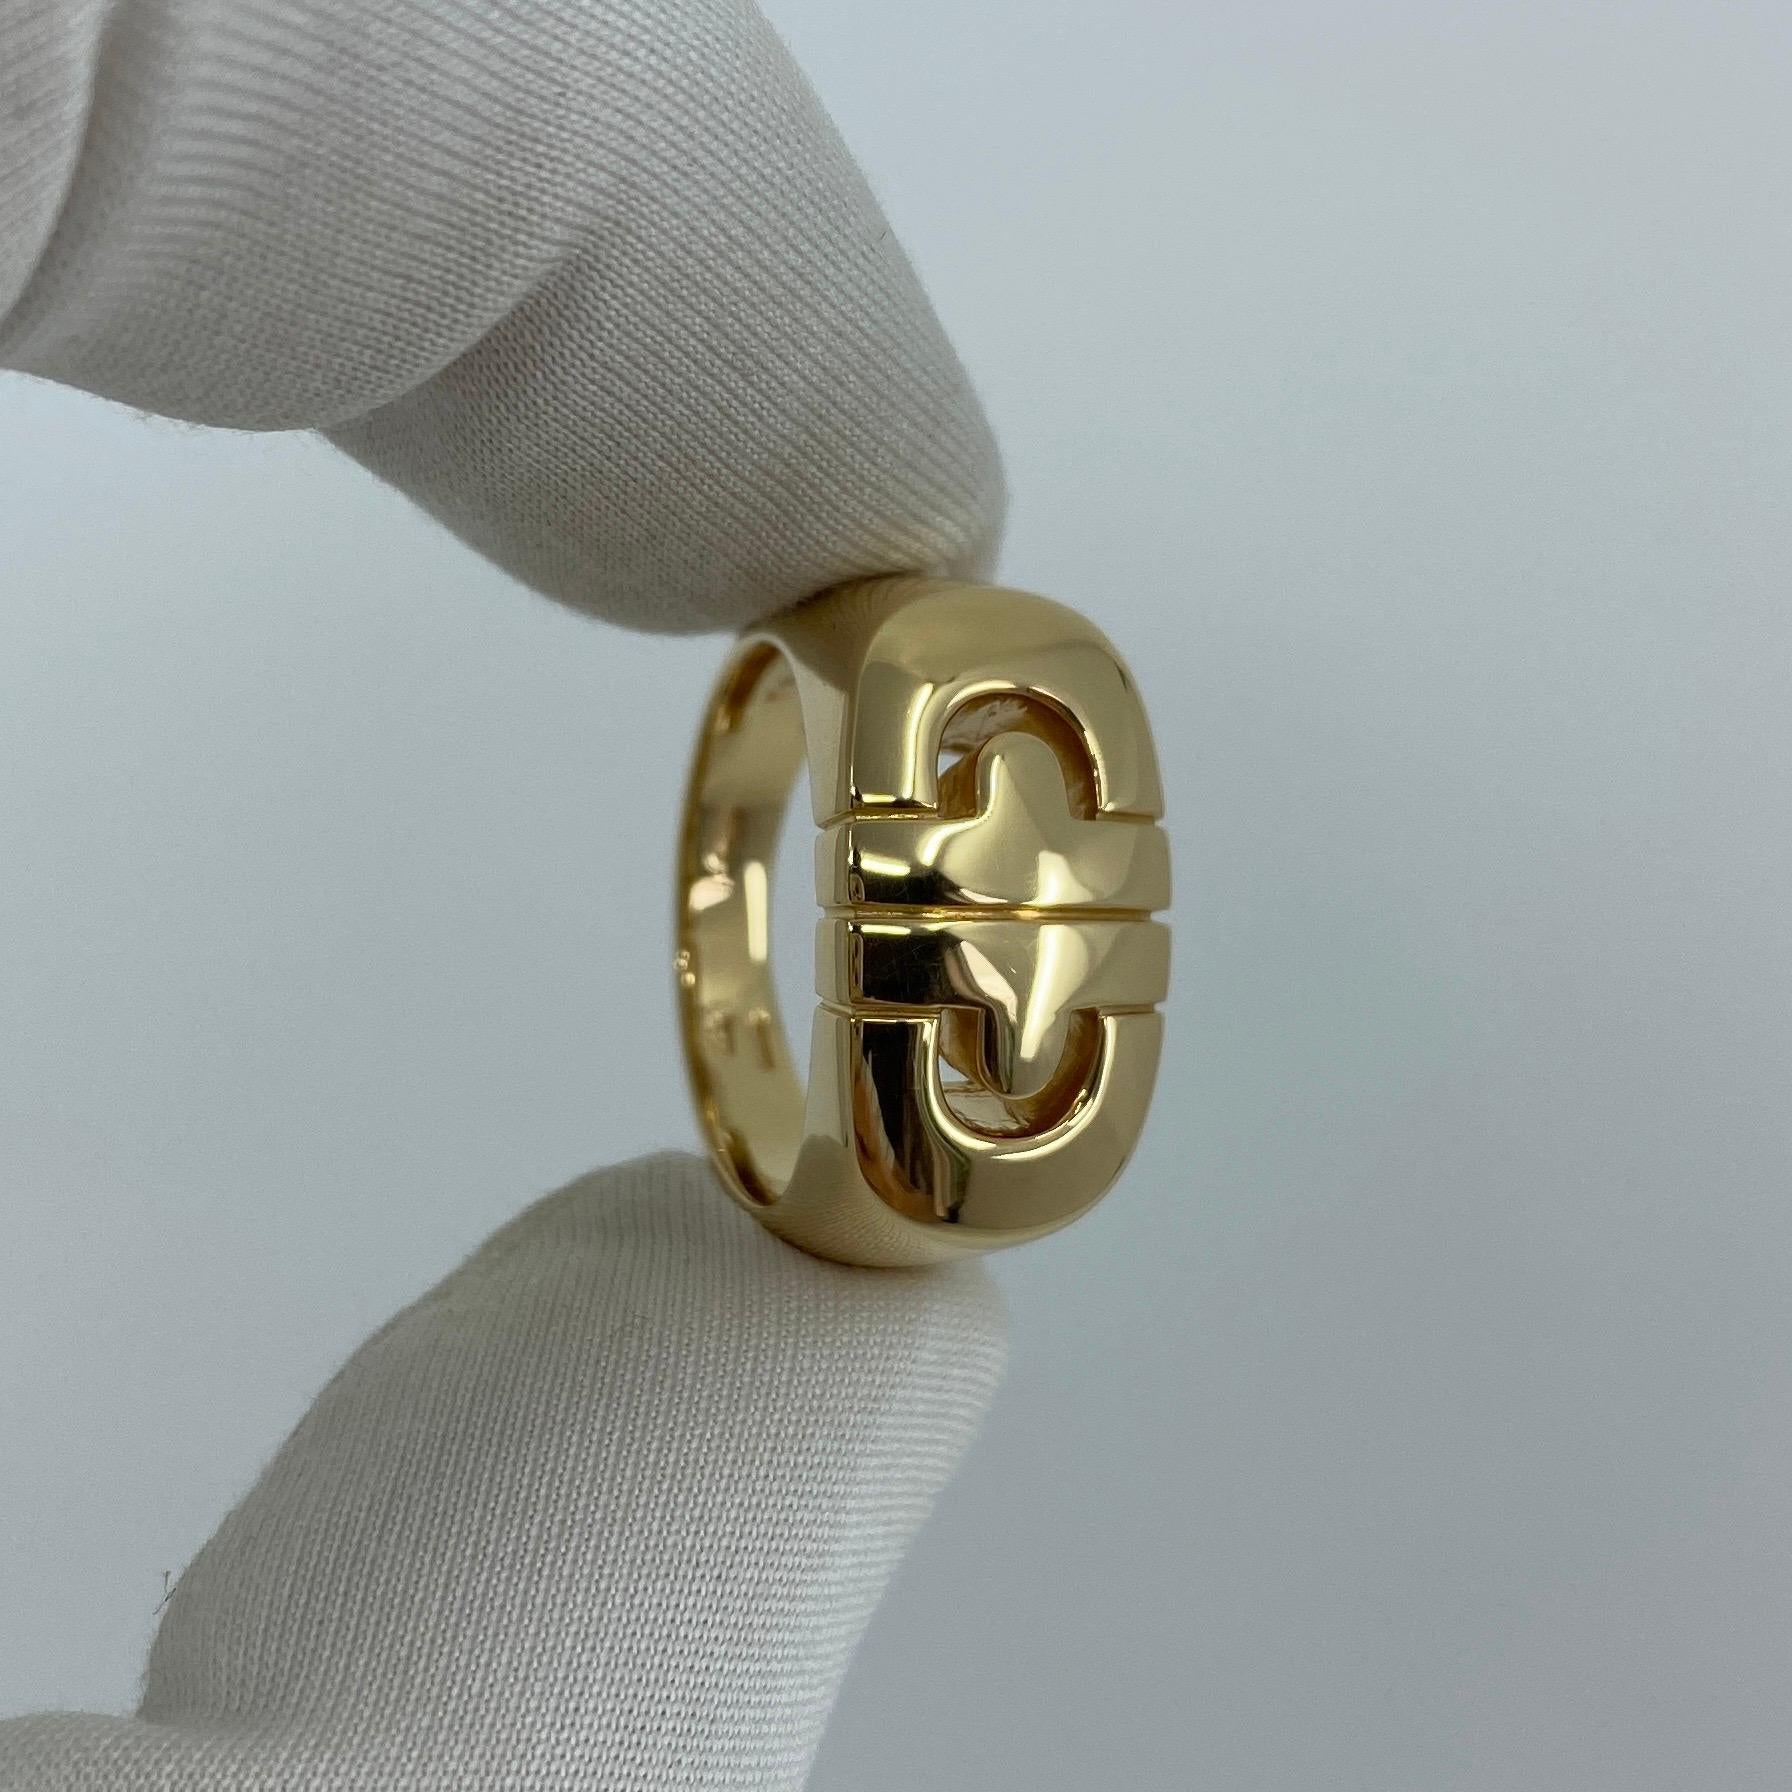 Bvlgari Parentesi 18 Karat Yellow Gold 'Signet Style' Italian Ring.

A beautiful vintage 18k yellow gold ring with iconic Bvlgari parentesi design.

Ring size: UK O1/2 - US 7.5
Ring sizing is possible.

This ring has been professionally polished and